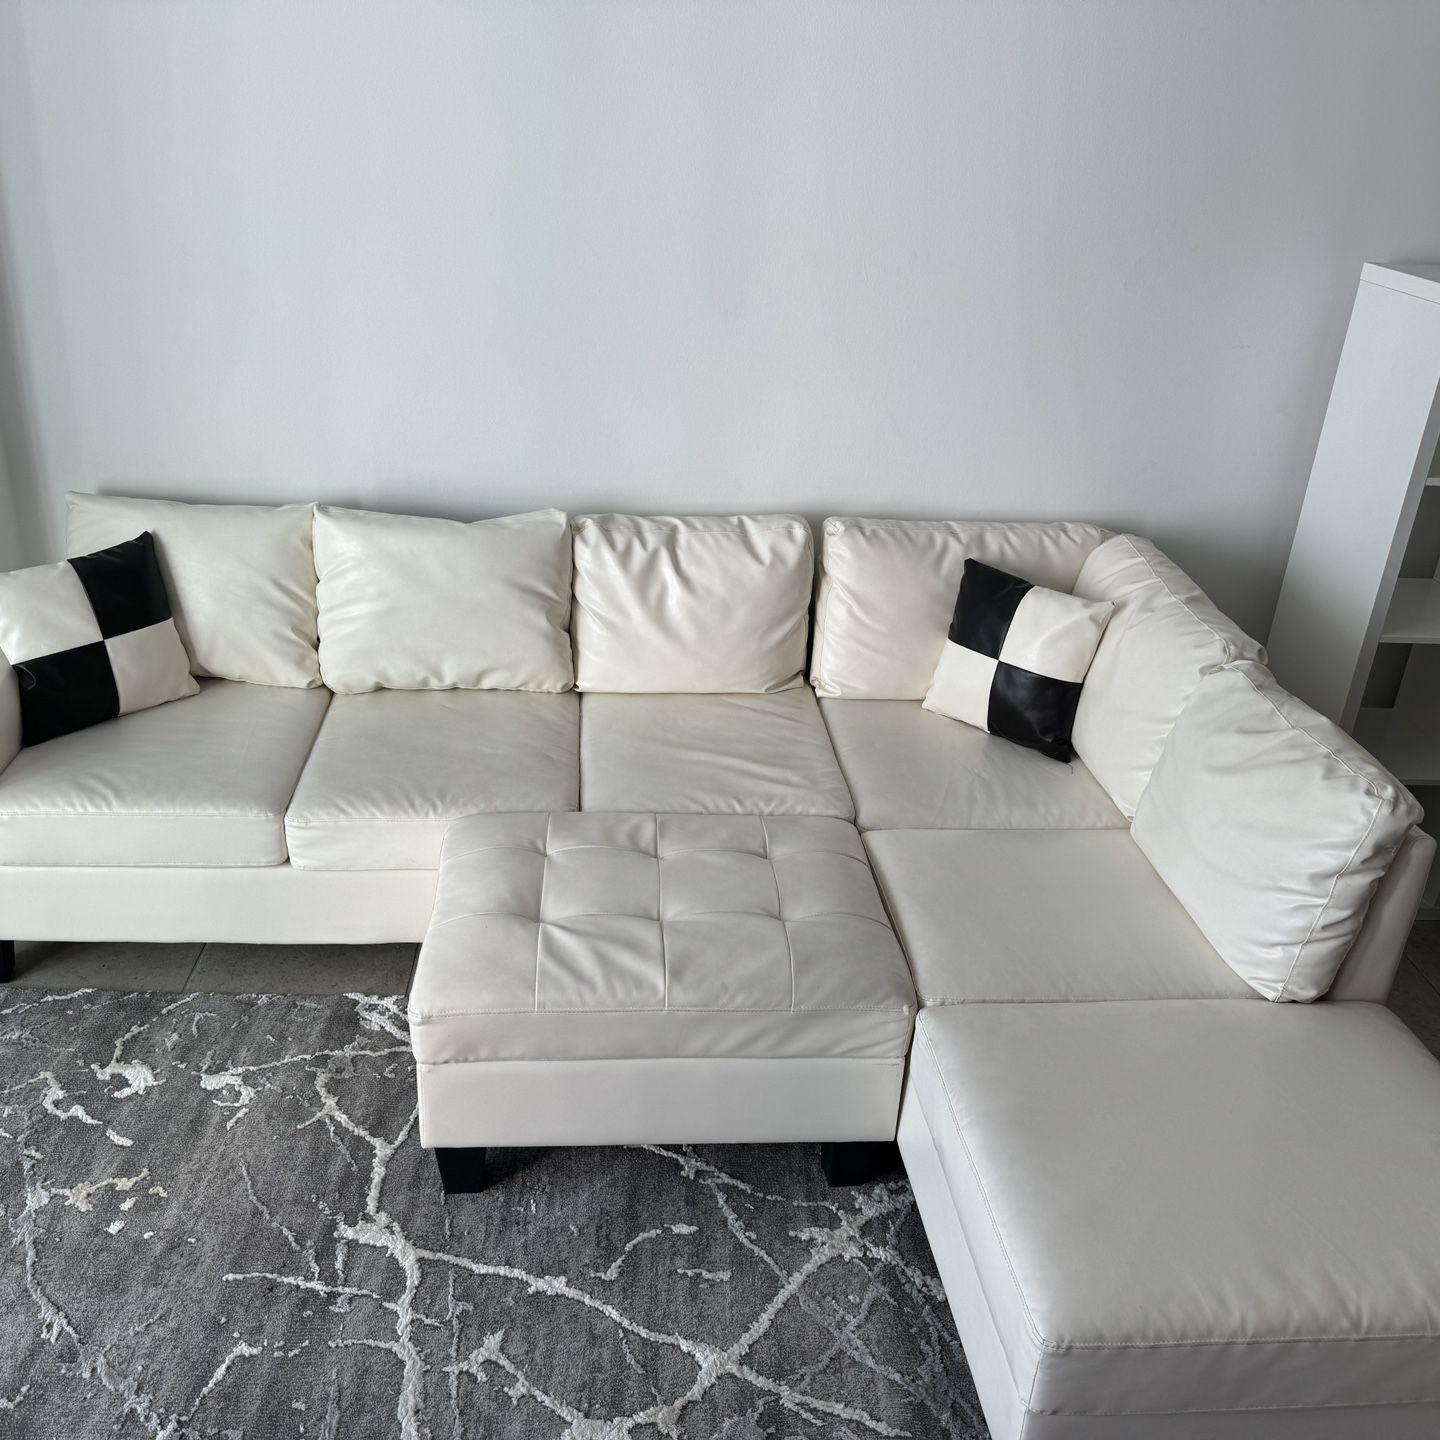 White / Cream Leather Large Sectional Sofa With Storage Ottoman